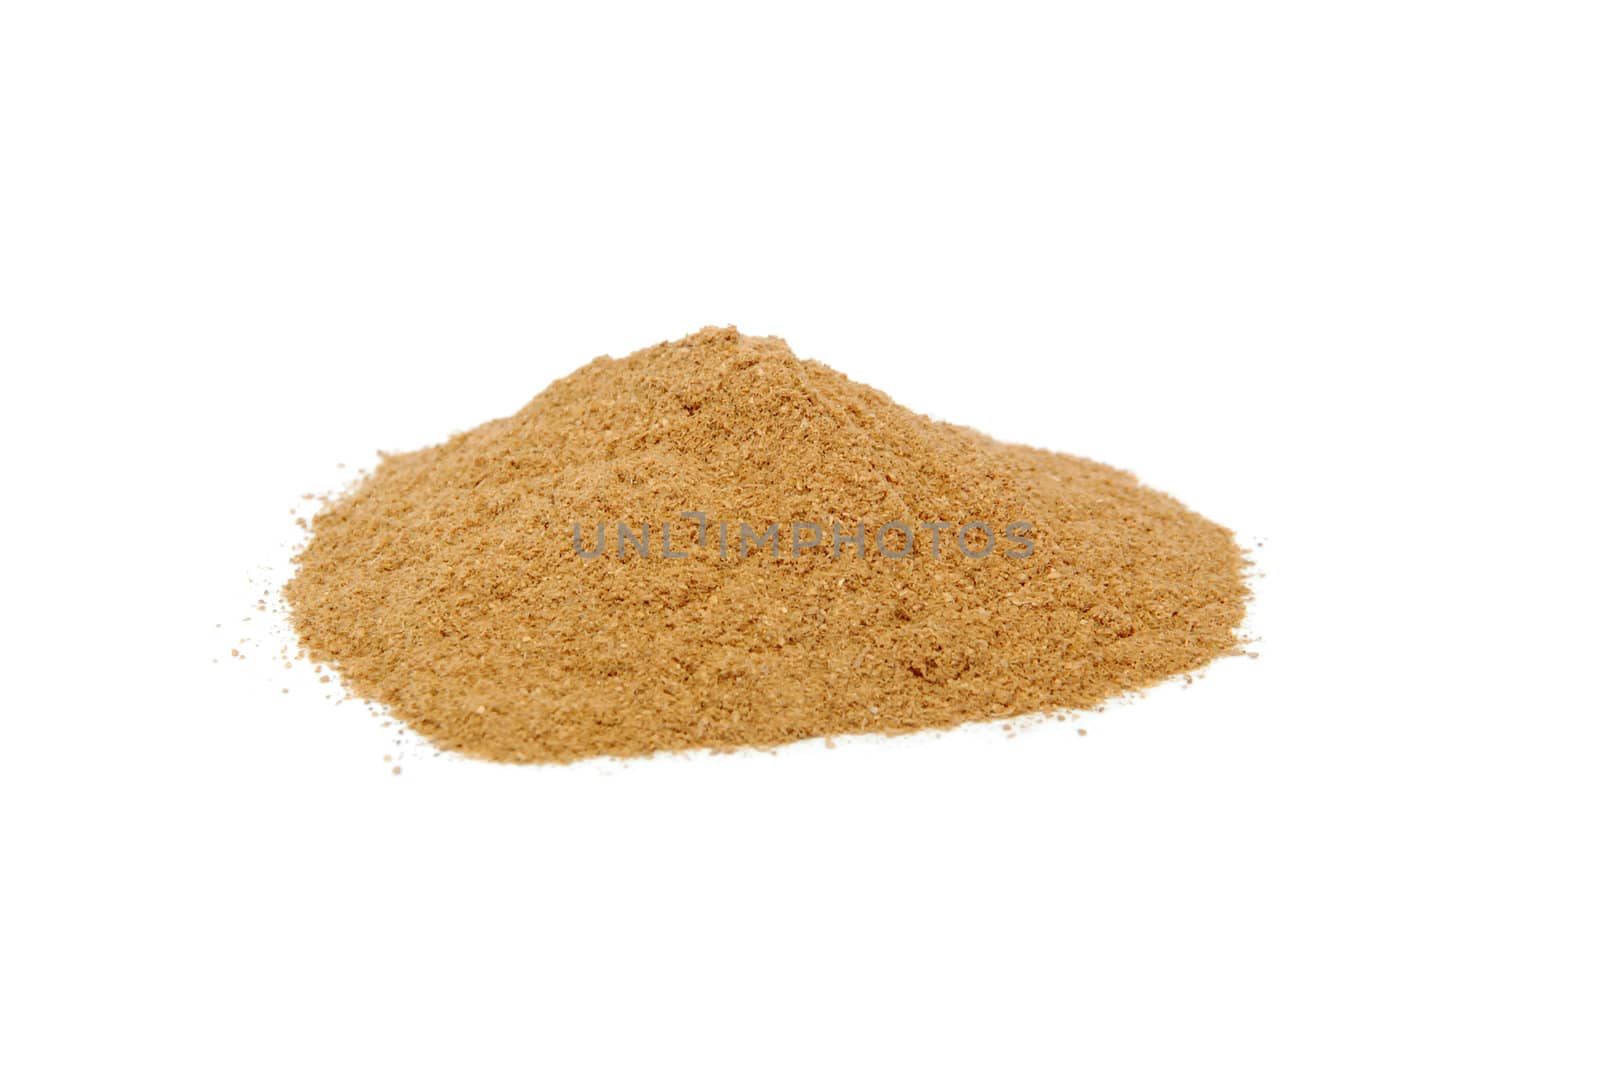 Ground cinnamon, isolated on a white background